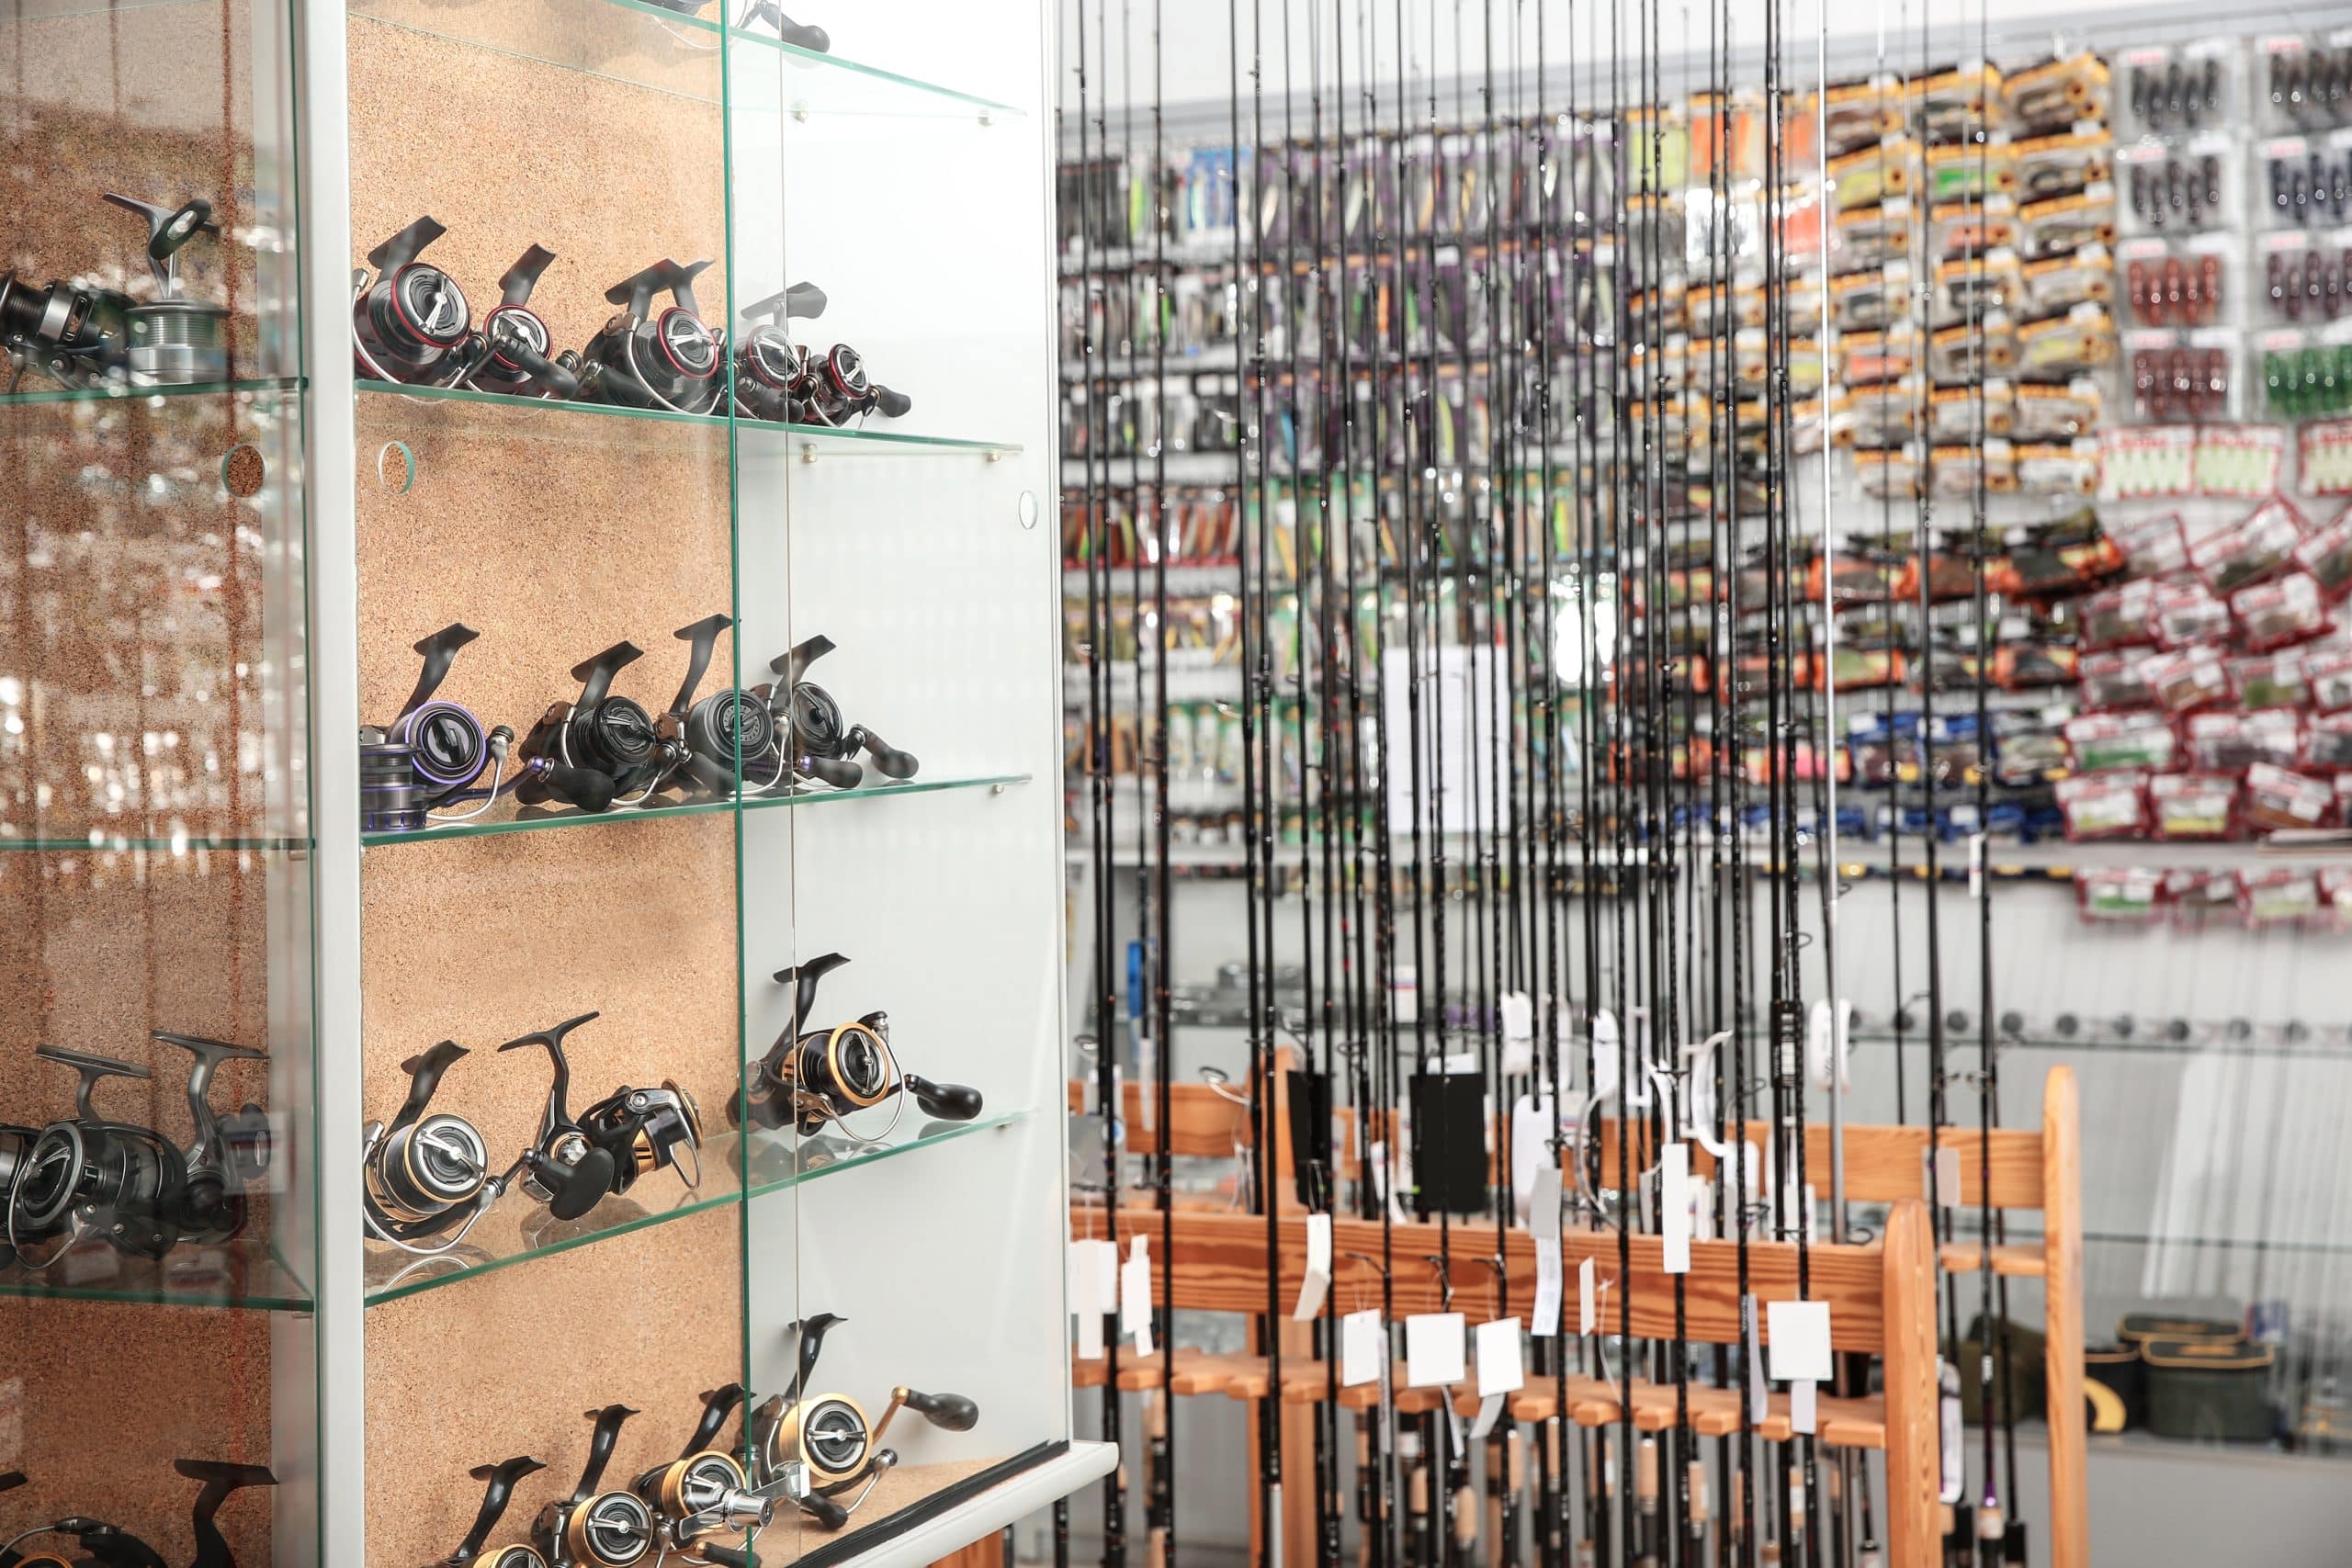 Are you a keen angler? Our Brentwood storage is here for you! Image shows a storage unit filled with angling fishing equipment including fishing rods.